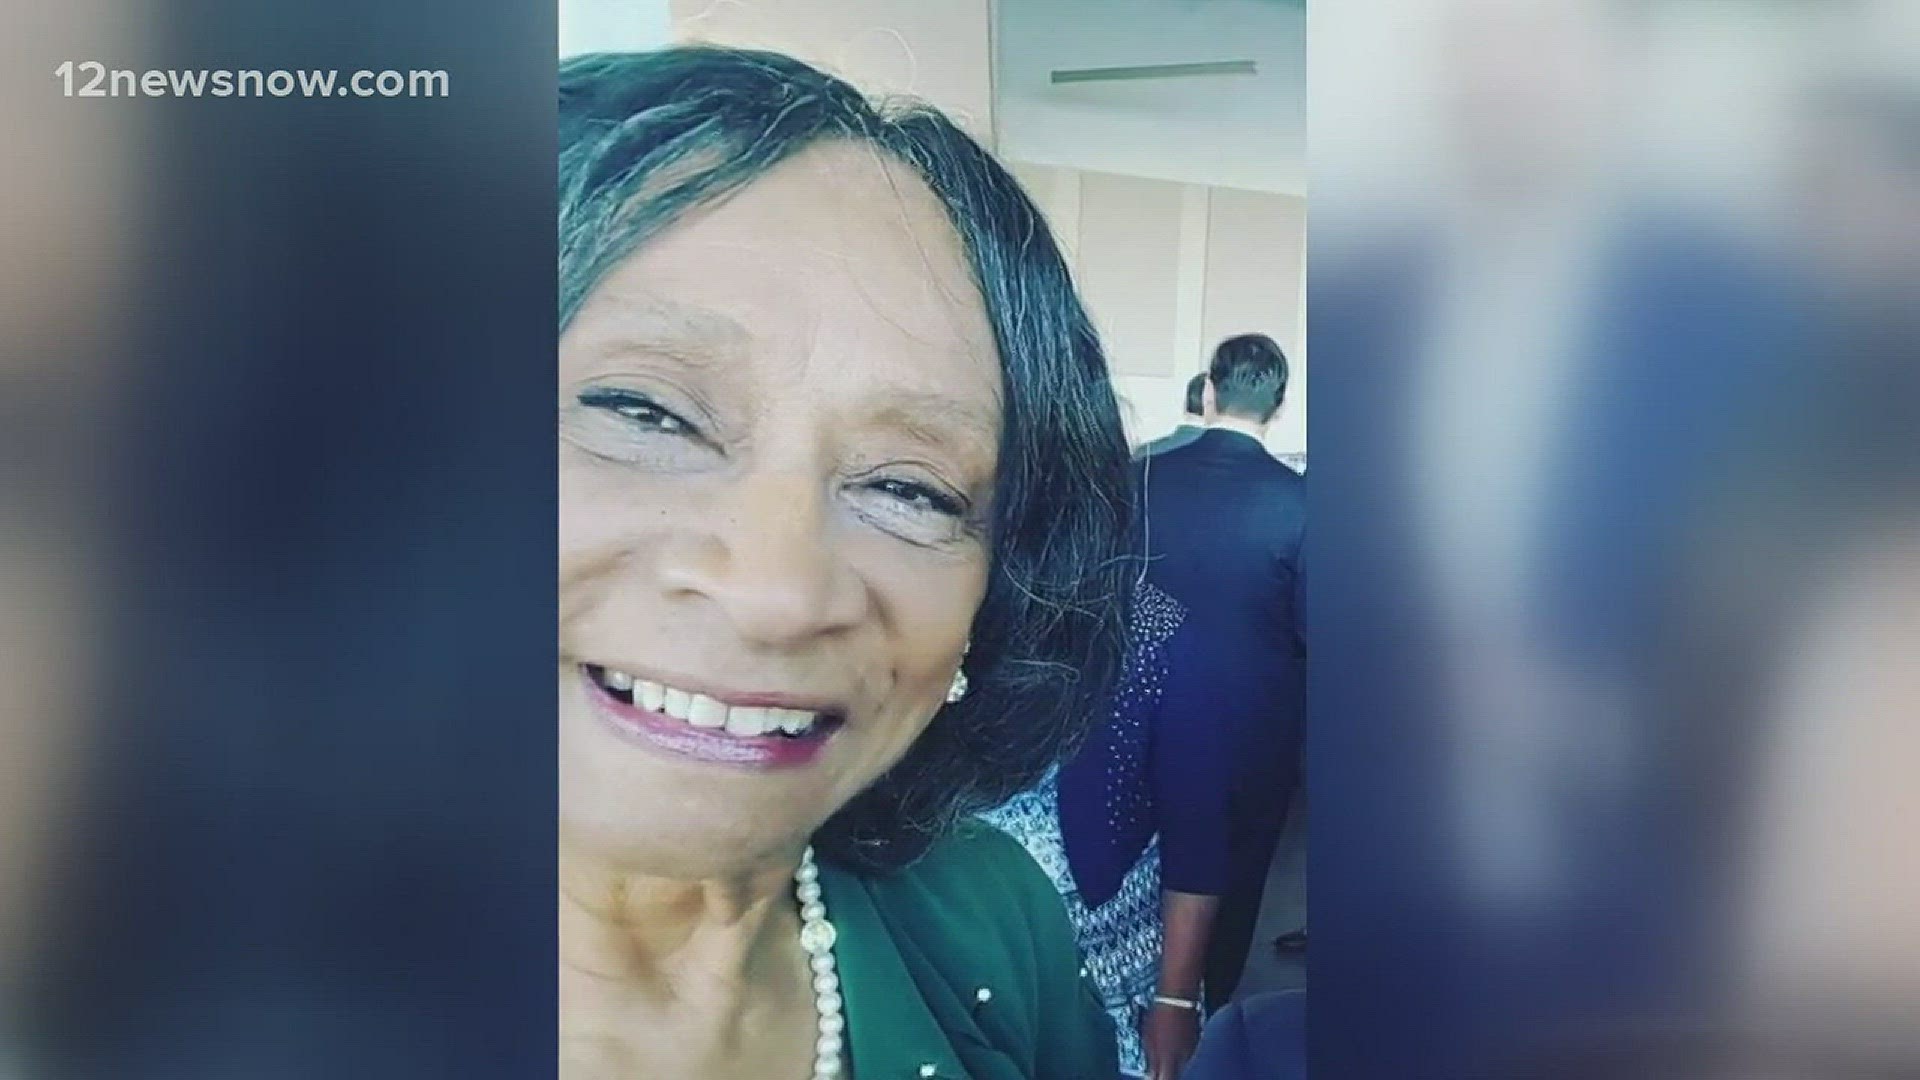 The community is mourning the loss of Beaumont city councilwoman Gethrel Williams-Wright who passed away on Sunday.